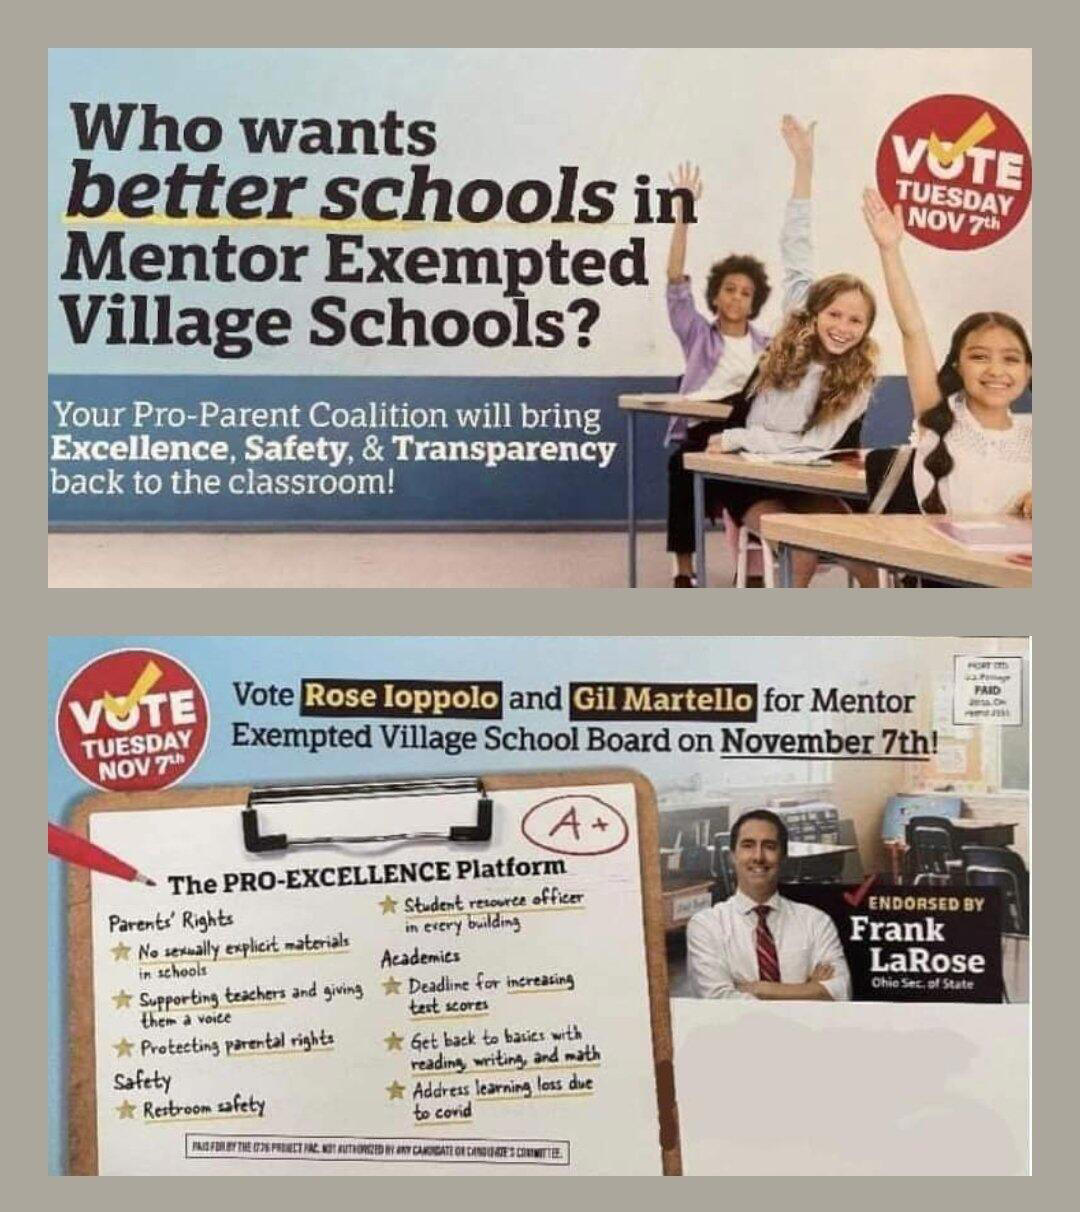 You have 2 votes for Mentor School Board. Lakeshore and Heisley